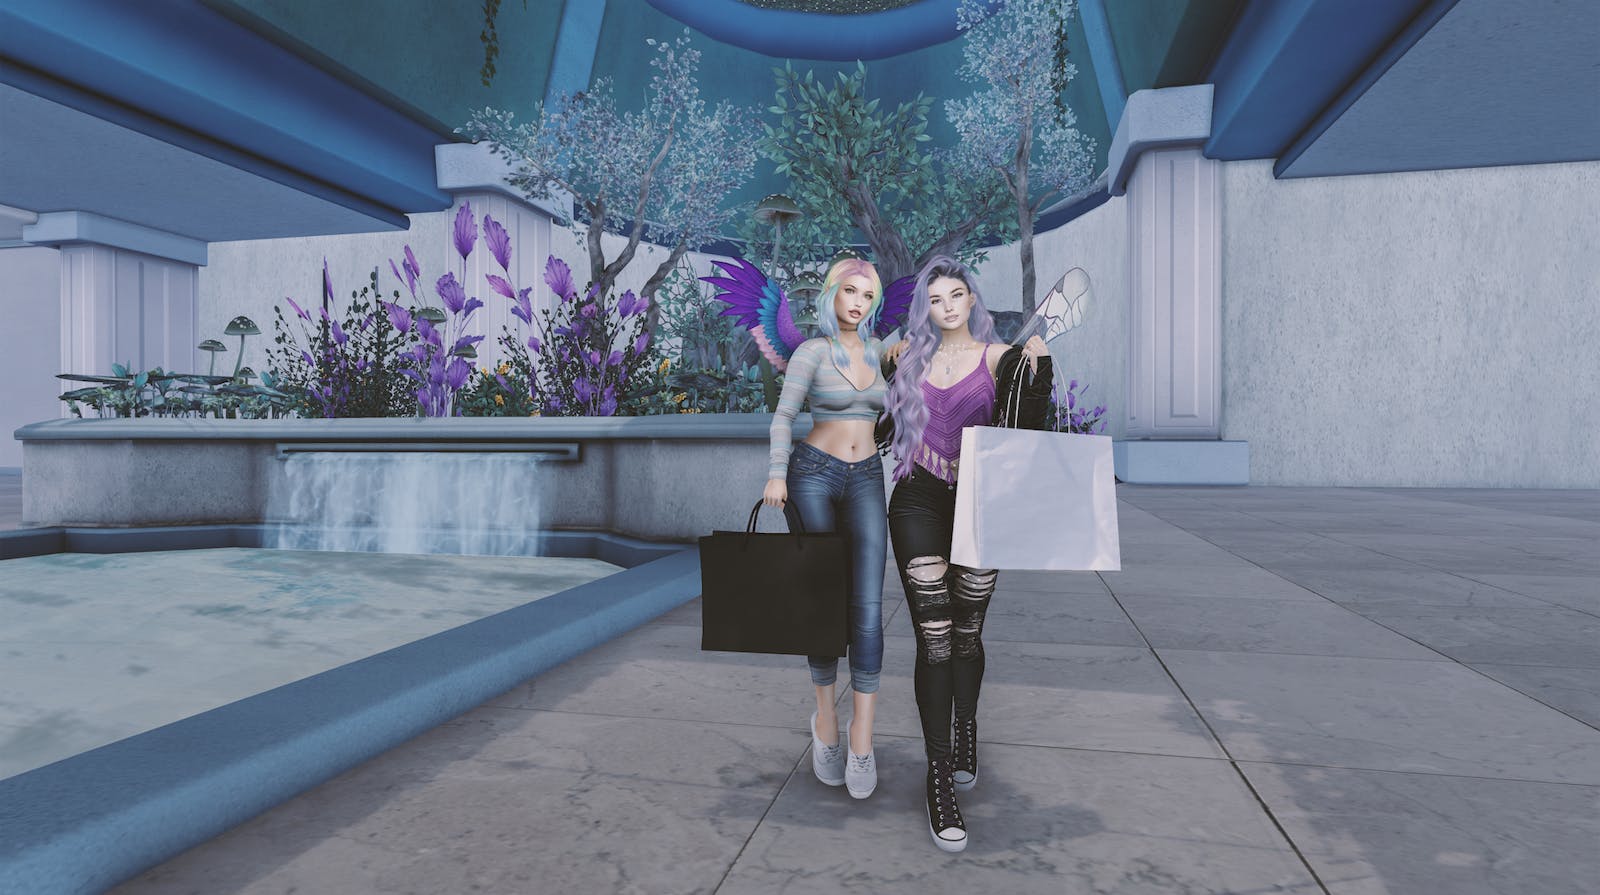 Avatars standing in a Second Life world. Credit: Linden Labs